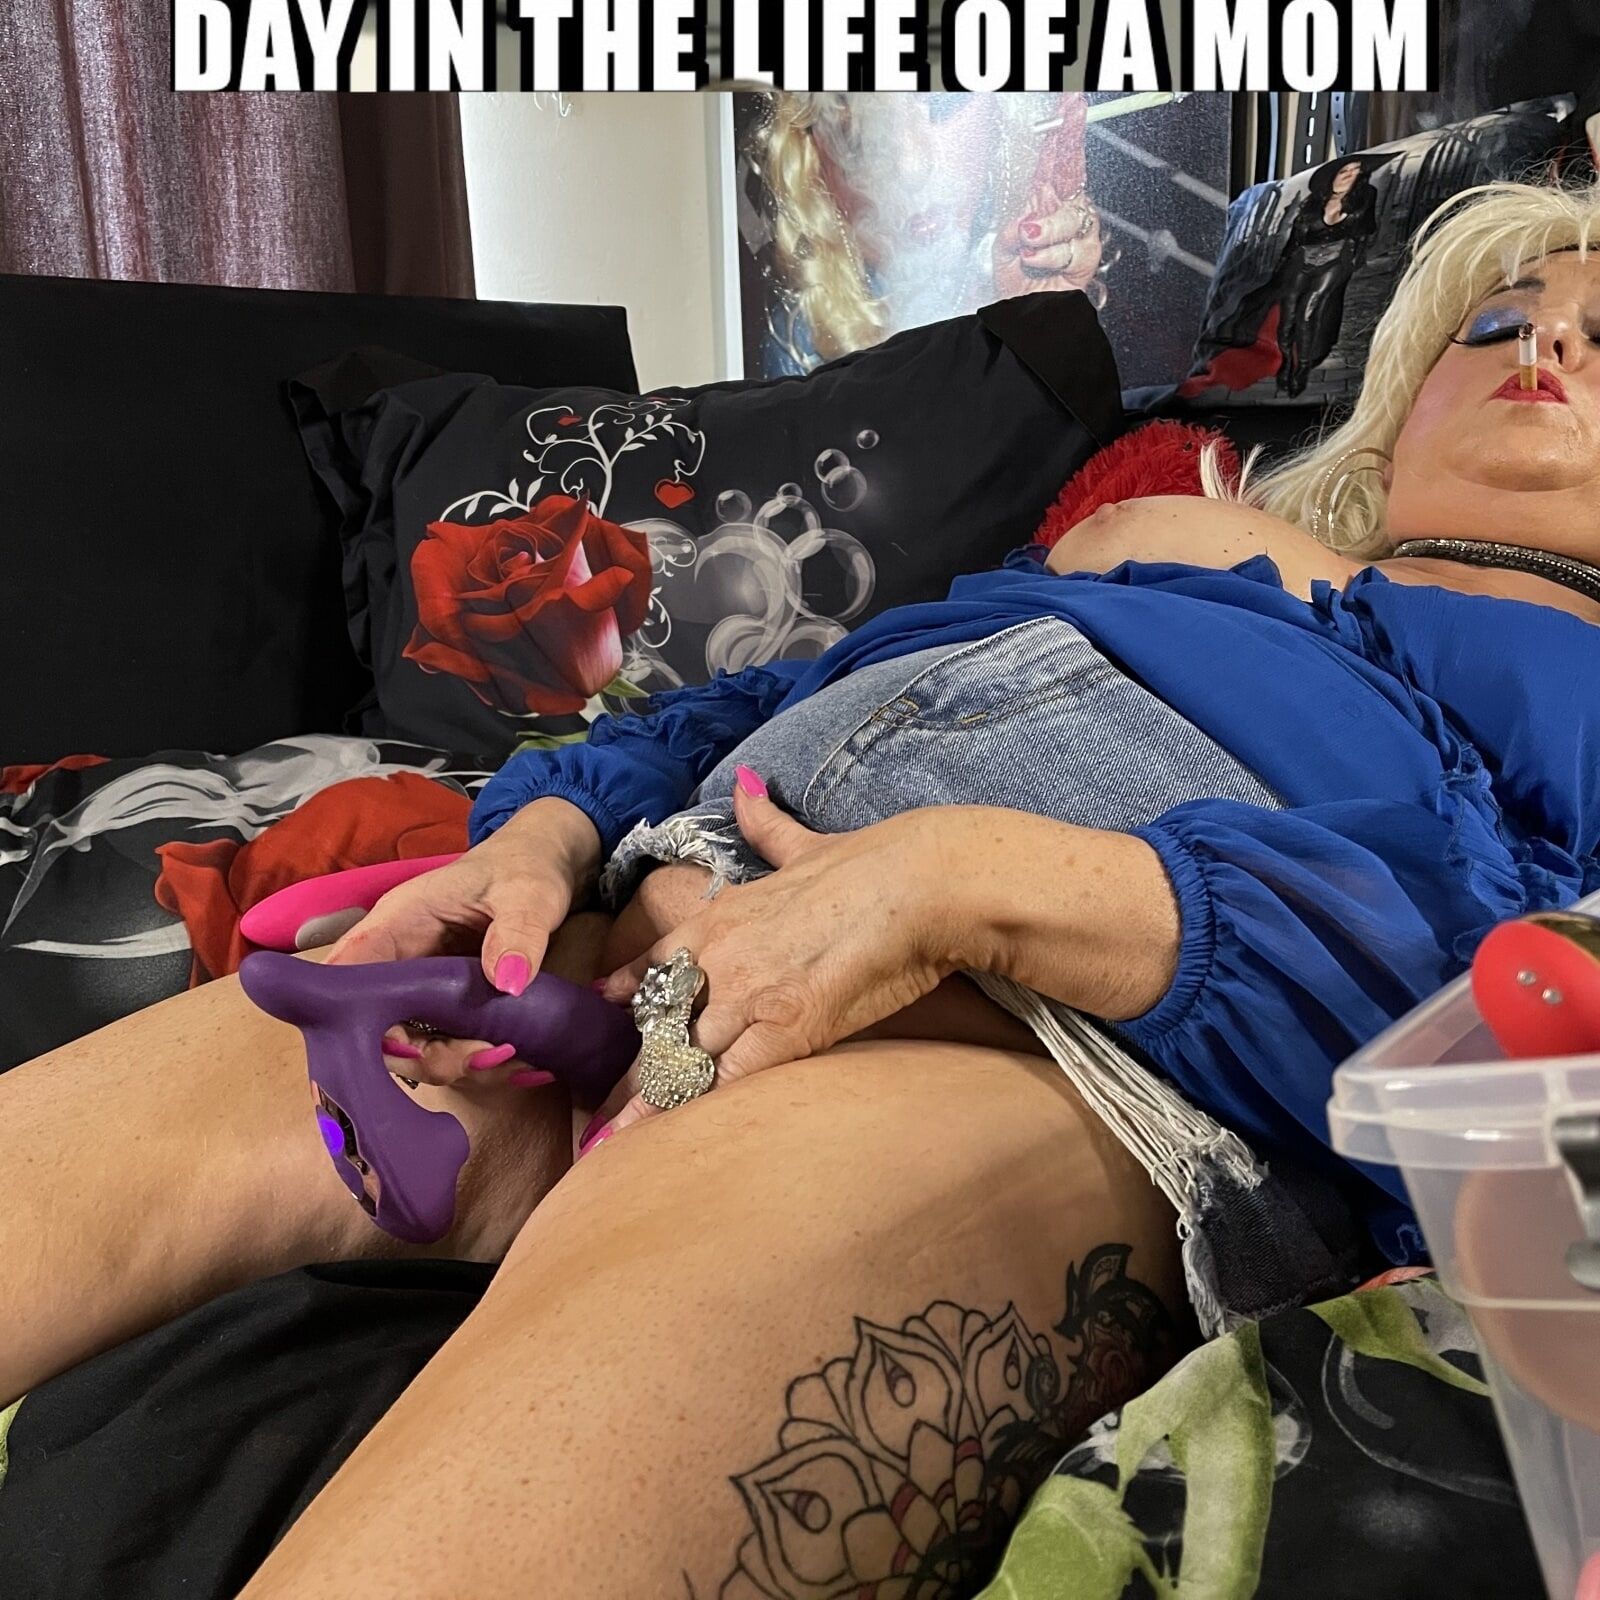 DAY IN THE LIFE OF A MOM SHIRLEY #48